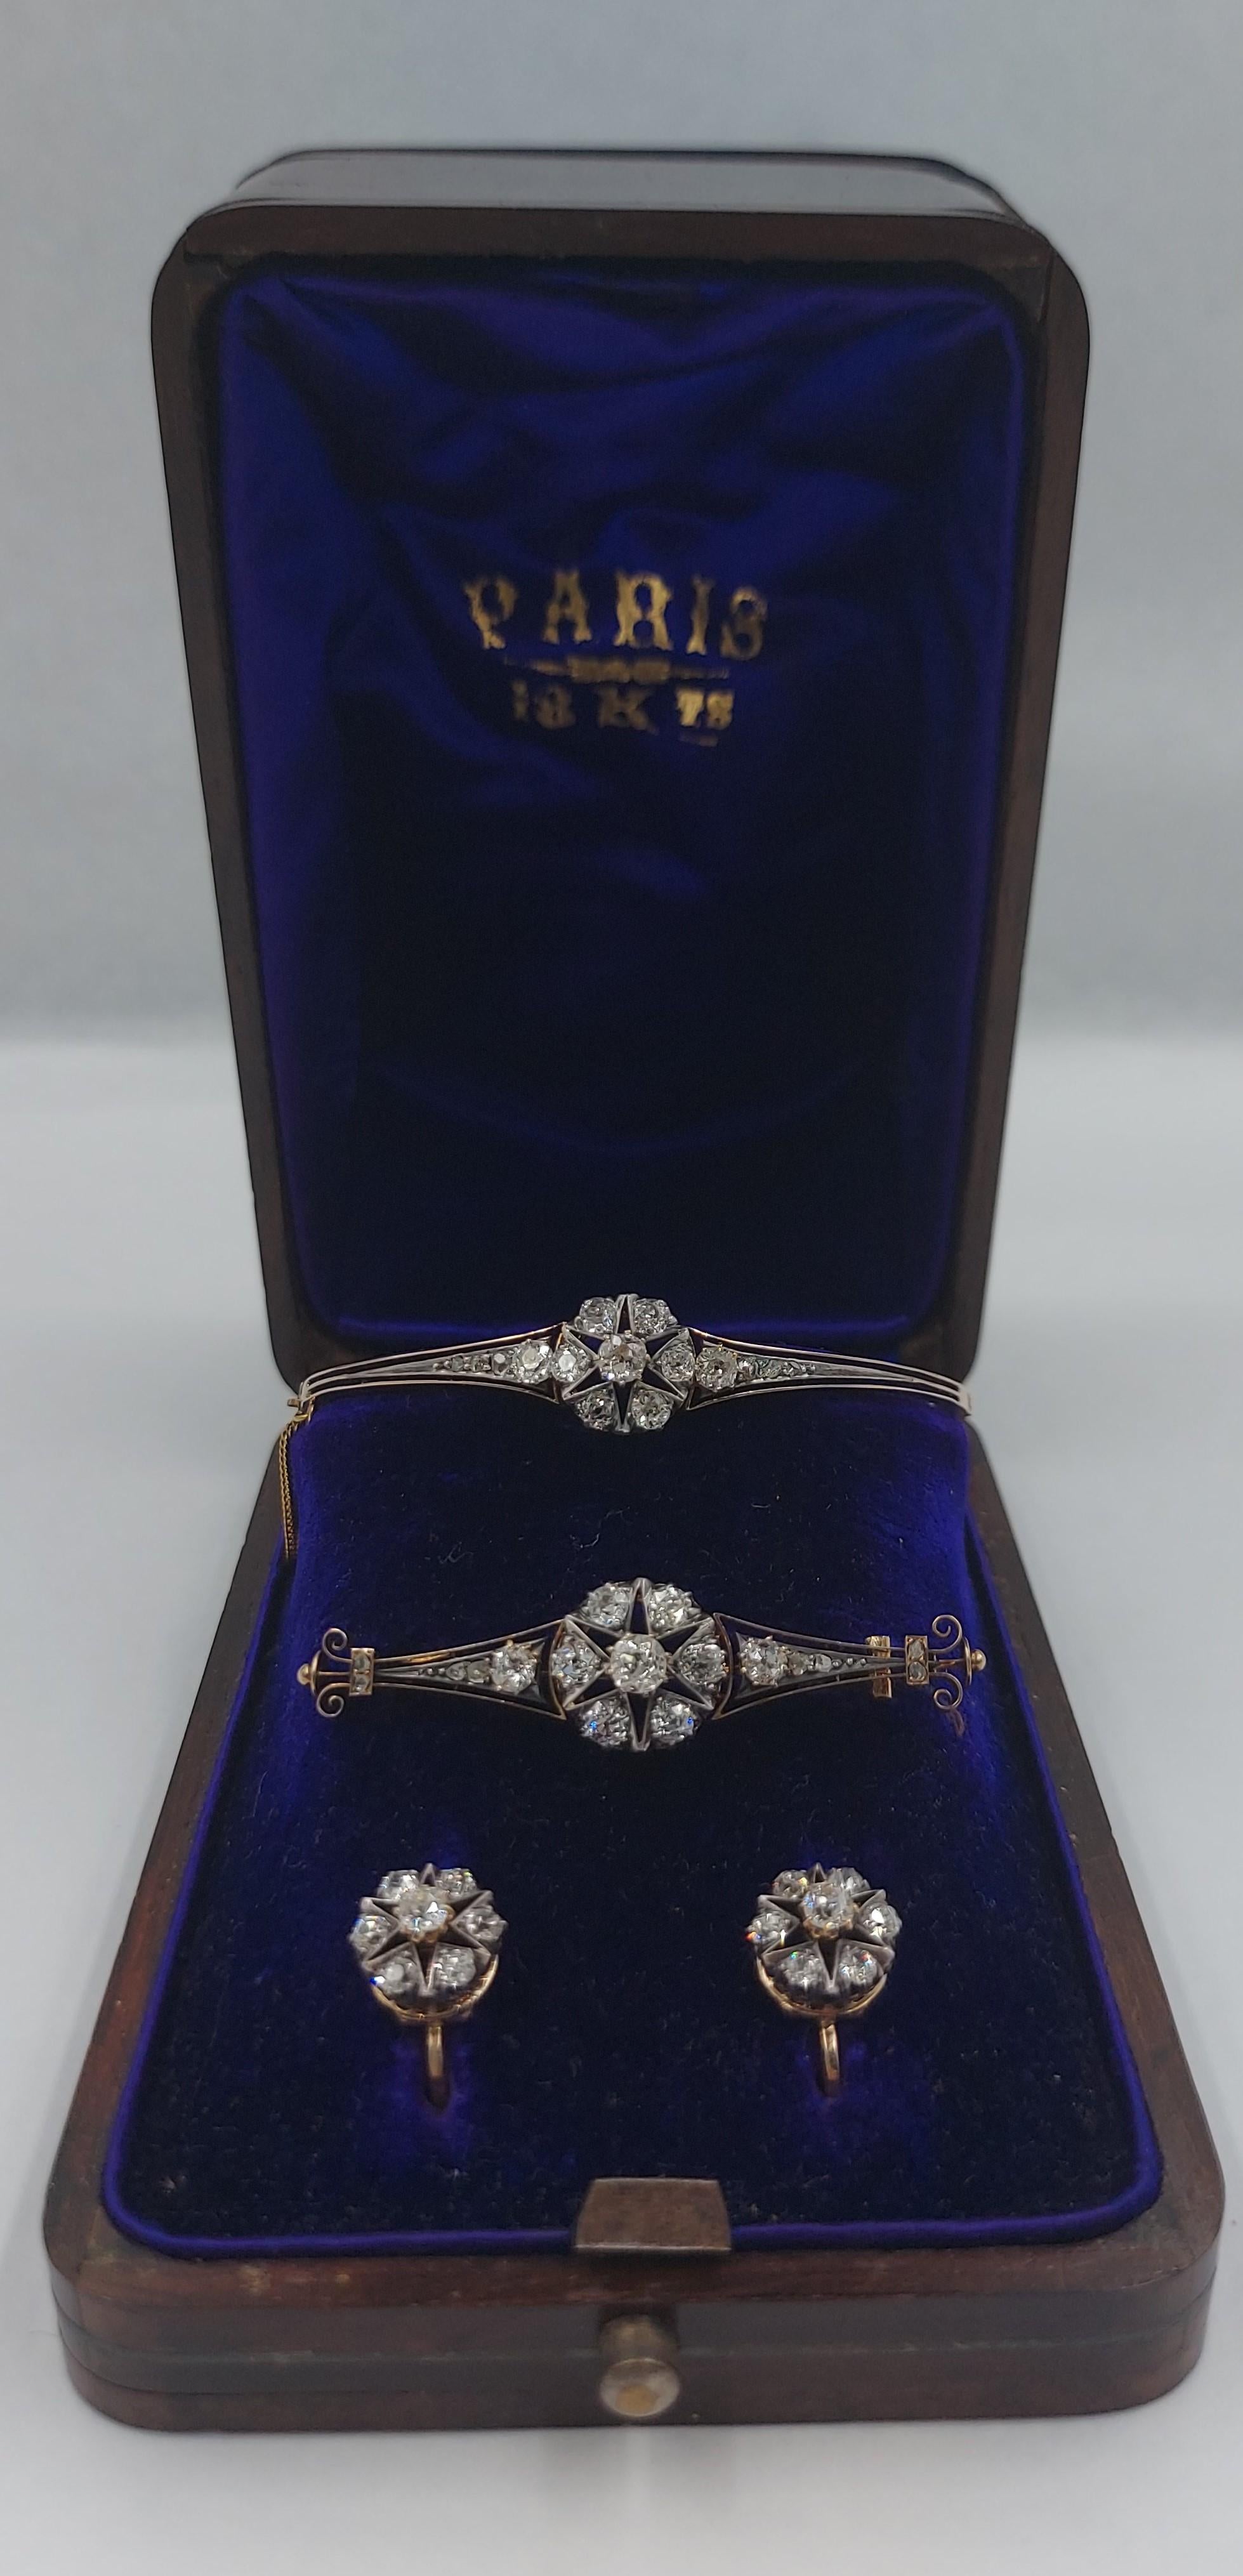 Antique, French, fine, elegant diamond parure. The set consists of bangle, brooch and earrings in original, fitted luxury box.  Circa 1890 typical stars design in 18 karats yellow gold  (signed 18)  with European cut diamonds (circa 5 carats) set in